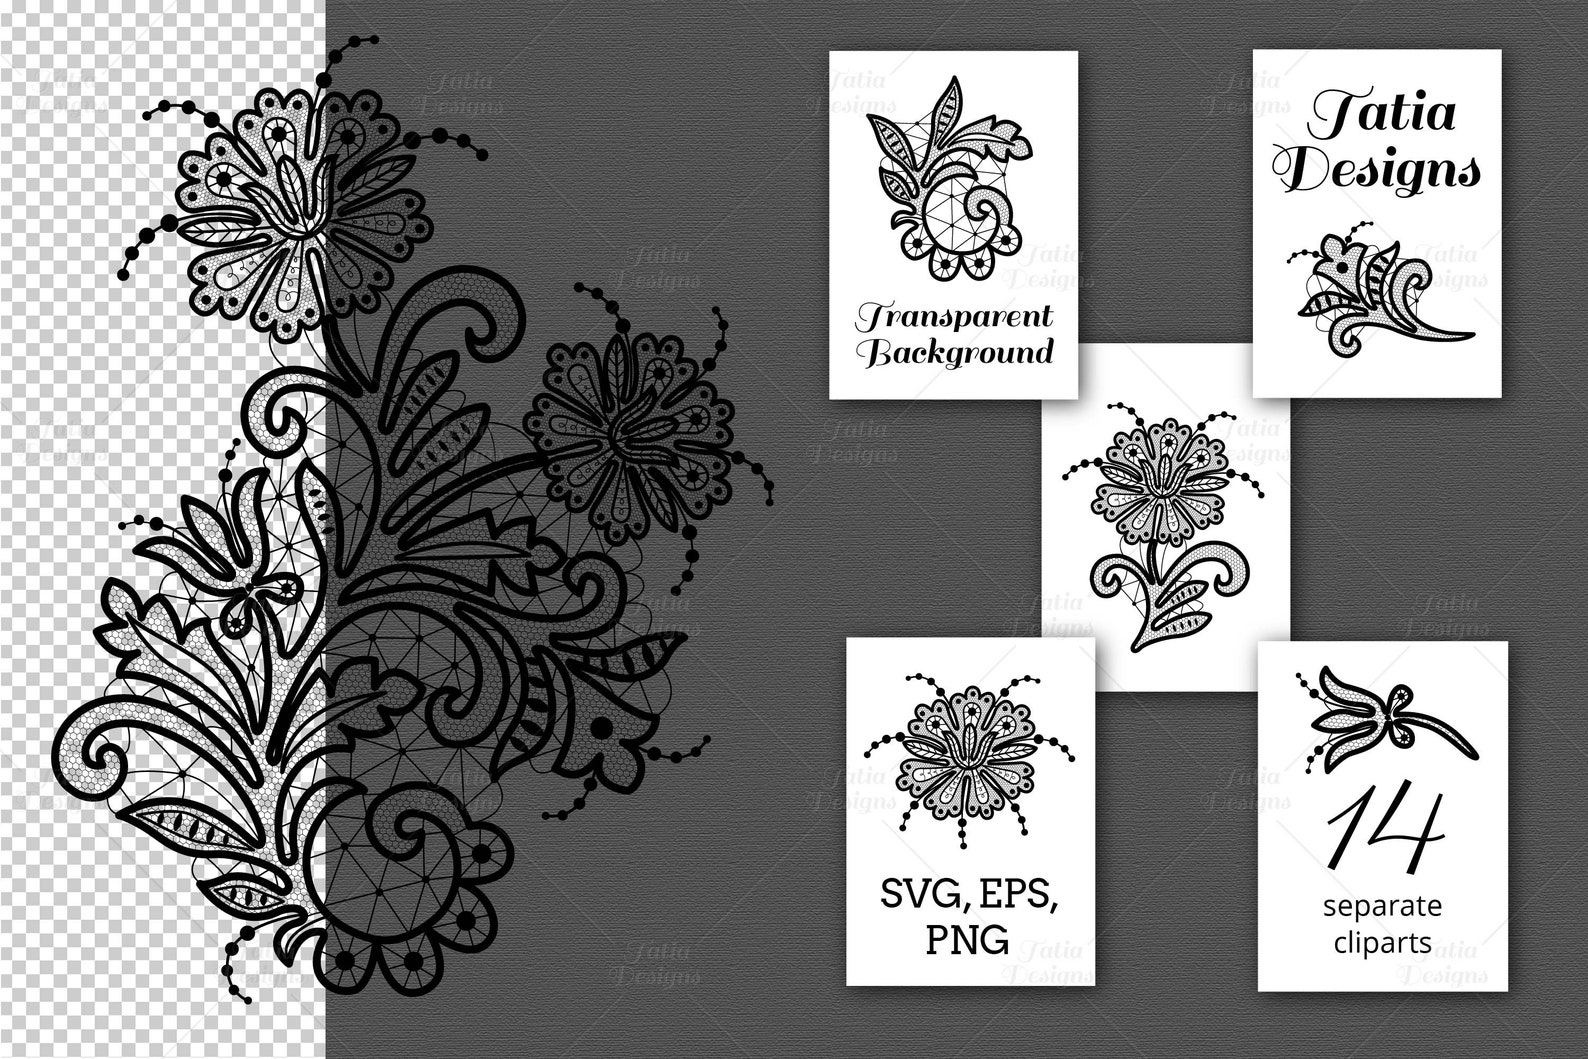 Lace Flowers vector clip arts SVG files for wedding design | Etsy